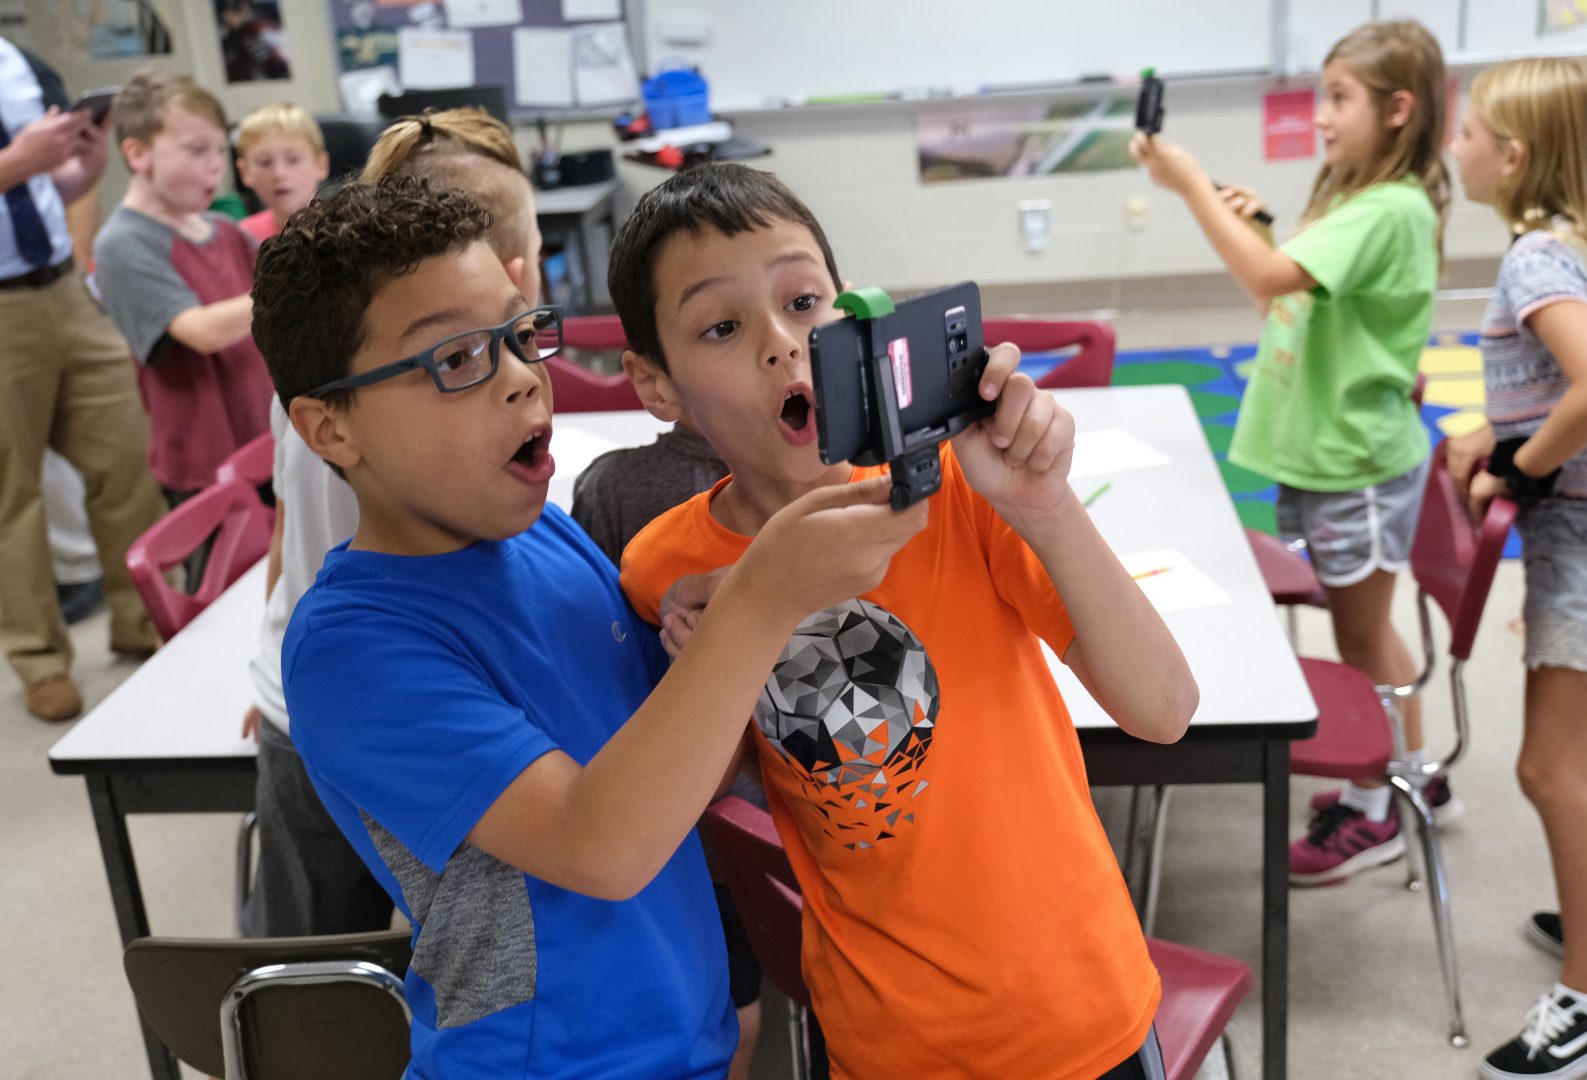 Dante Guzman, left, 8, and Emre Tokuc, right, 8, work with a tornado simulation augmented reality program on a smartphone Sept. 26, 2019, at Whitfield Elementary School in Spring Township, Pennsylvania. 